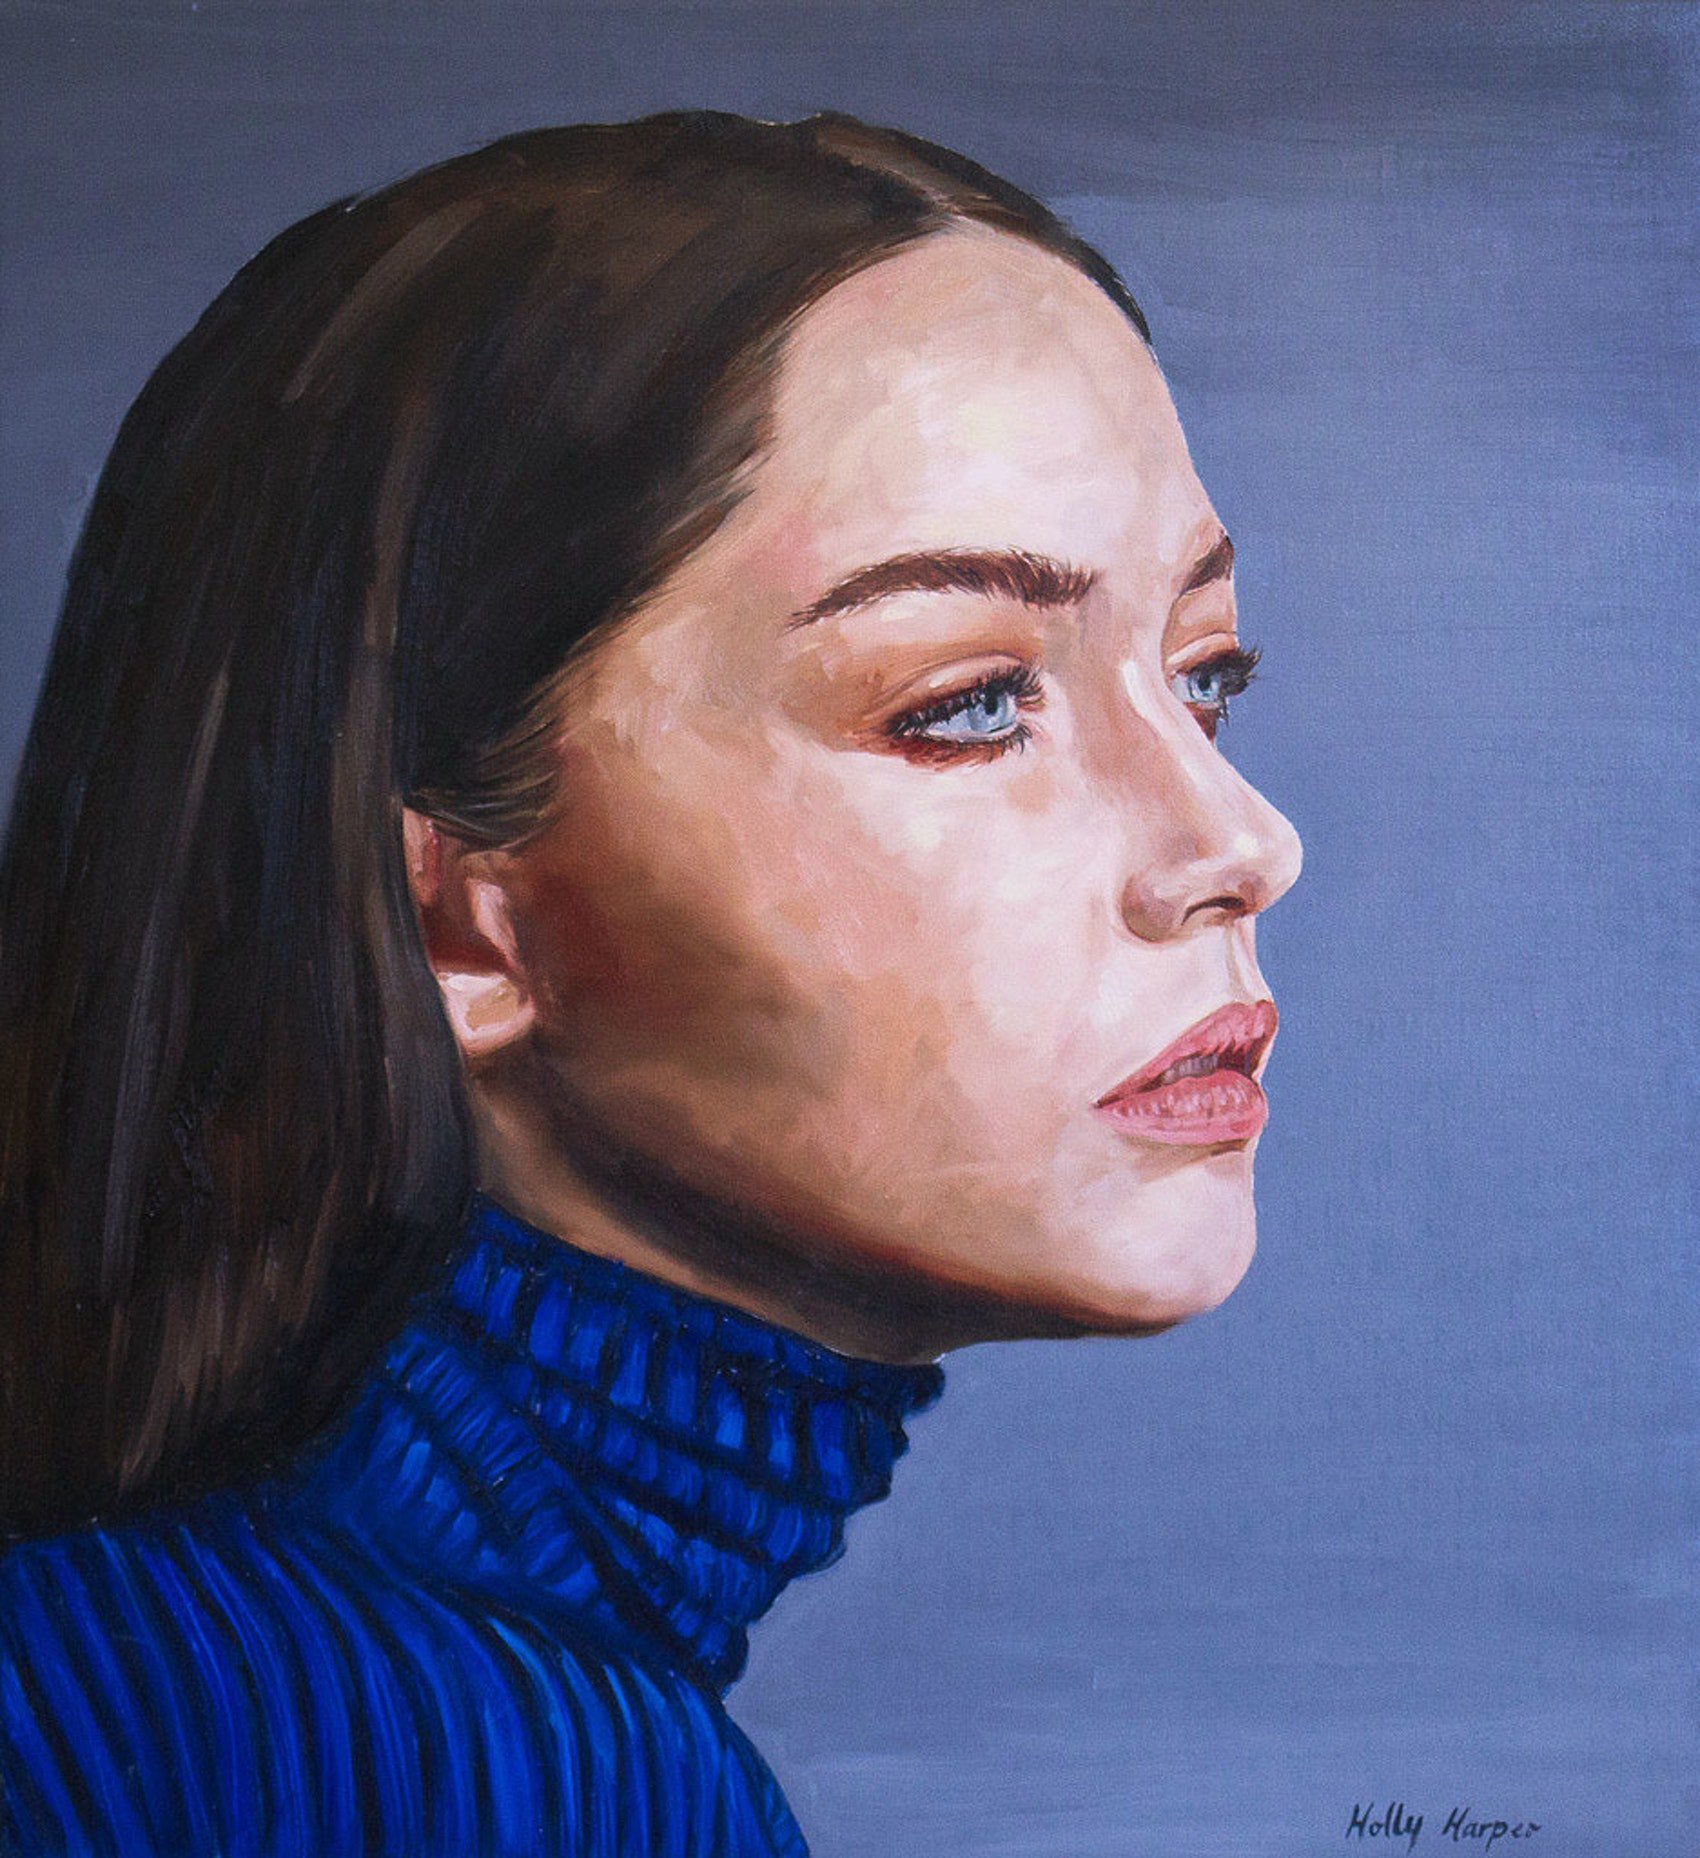 Lily of the Valley by Holly Harper. A pensive portrait of a woman with a blue turtleneck and blue background. Art.